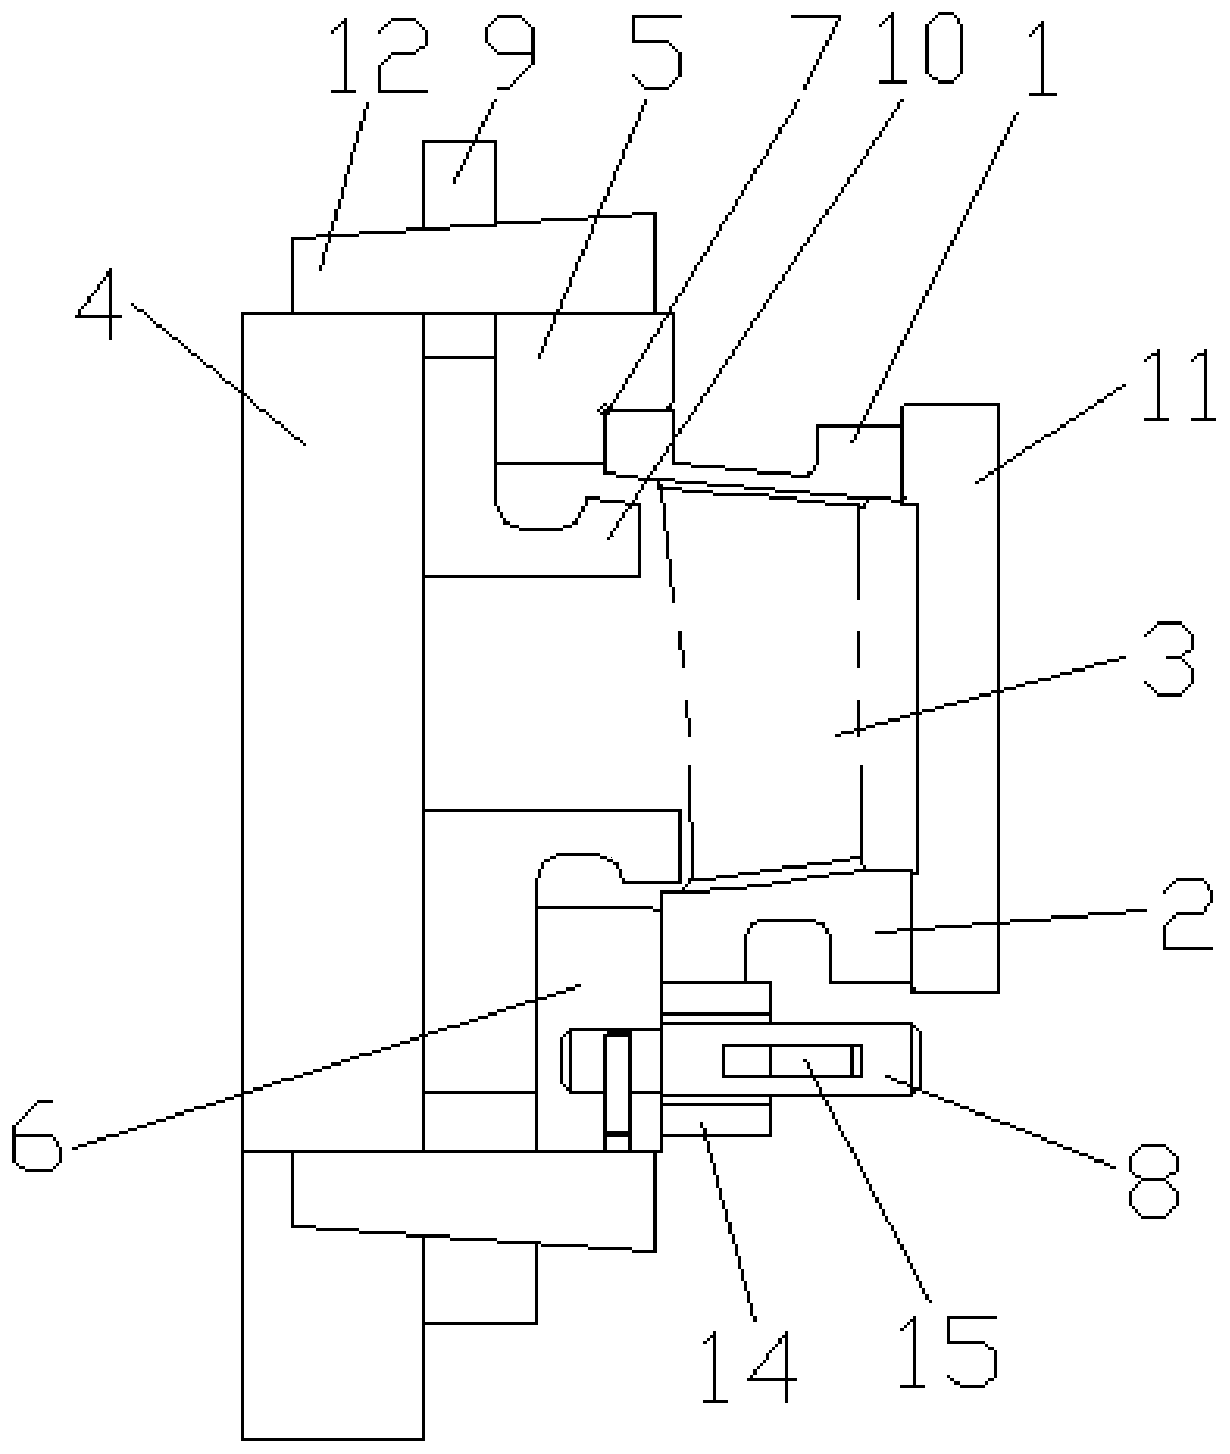 A fan-shaped fixture and method for reducing welding deformation of a blade assembly